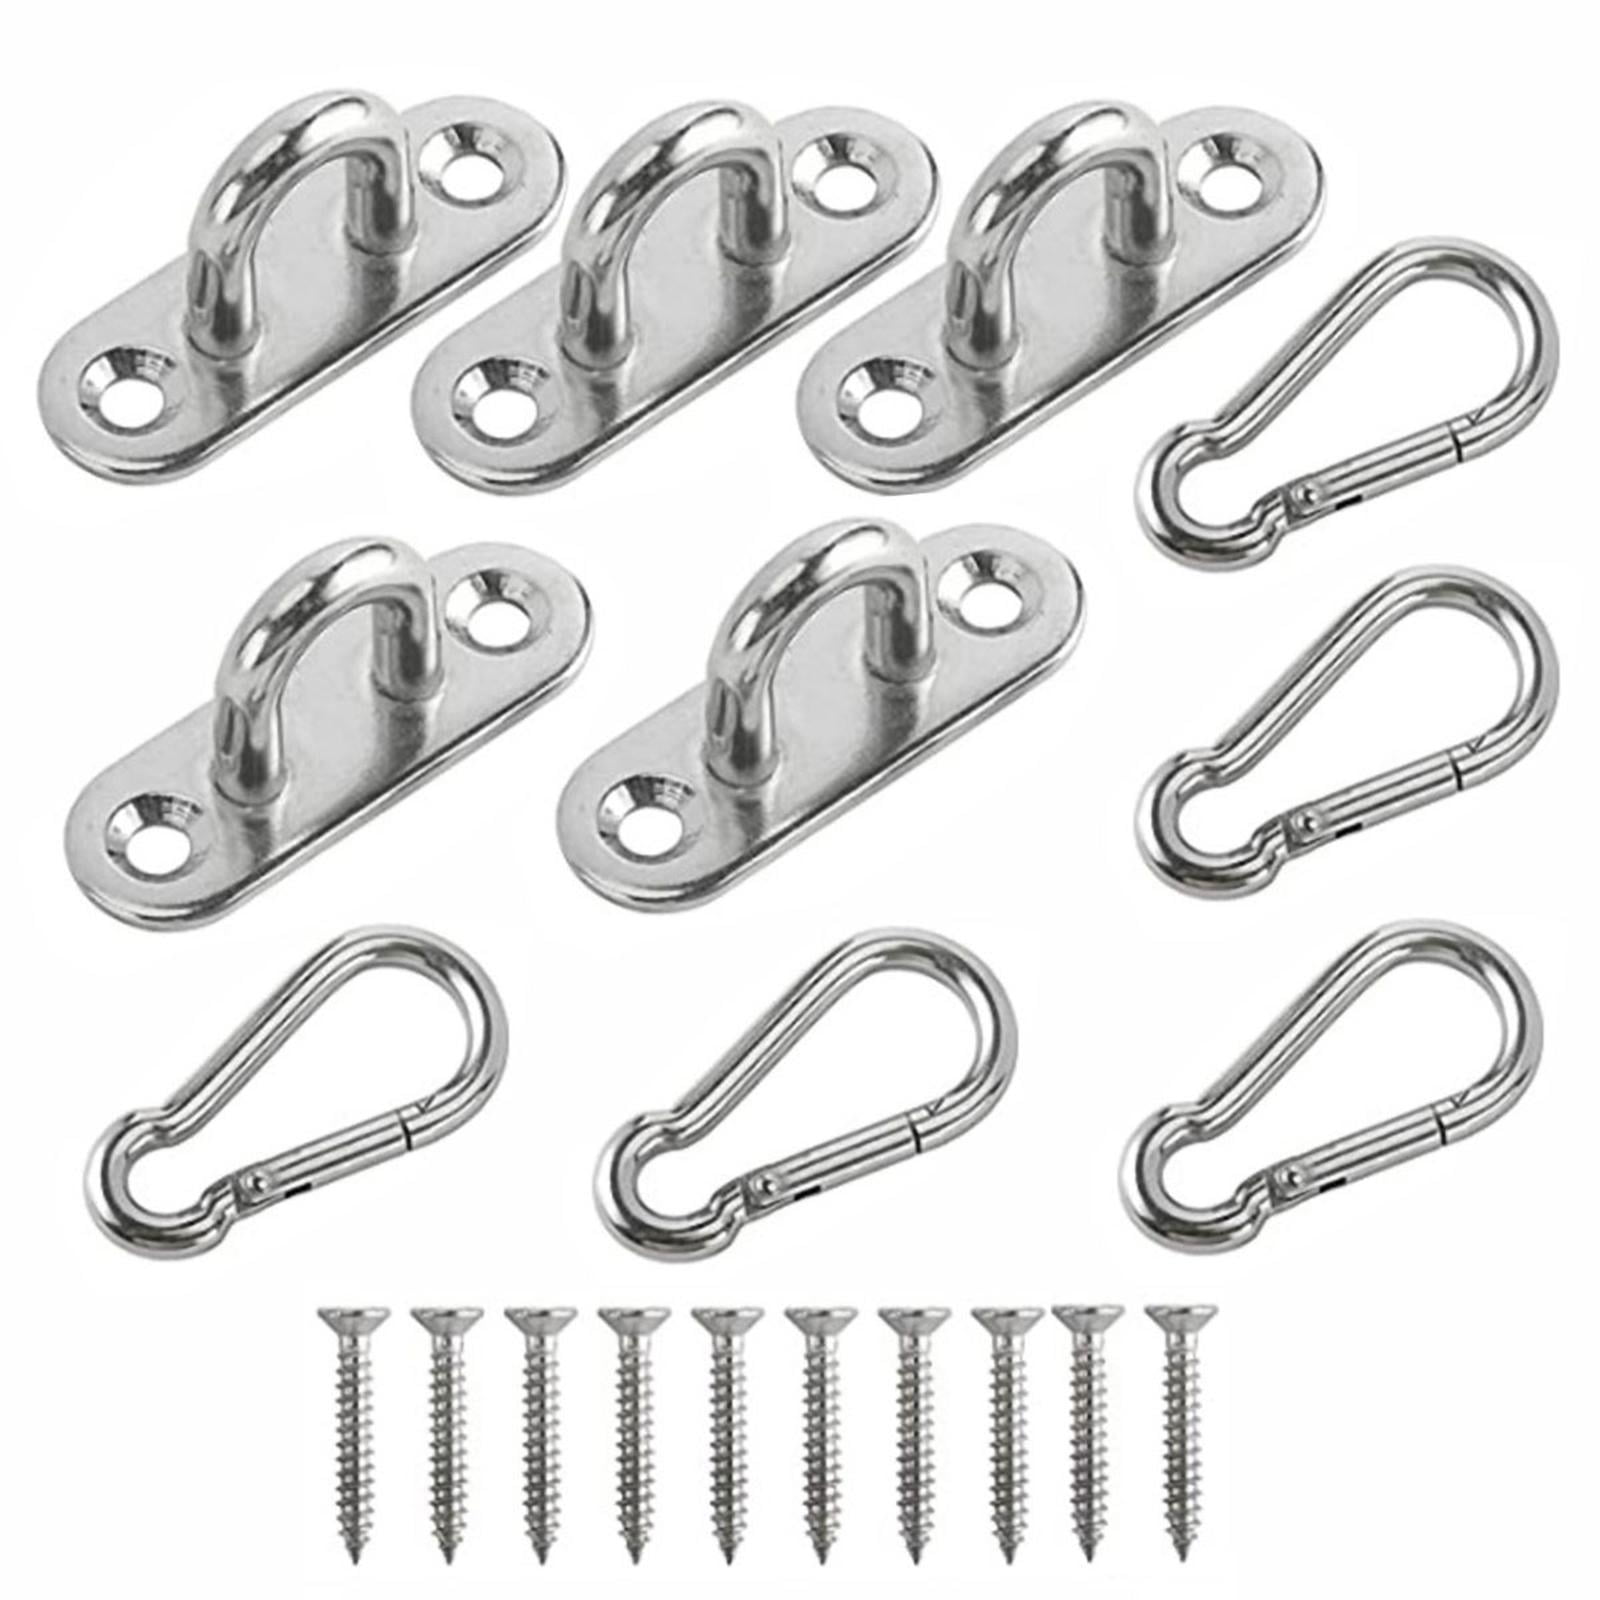 YAIRMIS 5 inch 4-Pack 304 Stainless Steel Heavy-Duty Screw Eye Hook Eye Bolts, Suitable for Rowing Racks, Hammock, Awning, Hanging Chair, Swing Chair